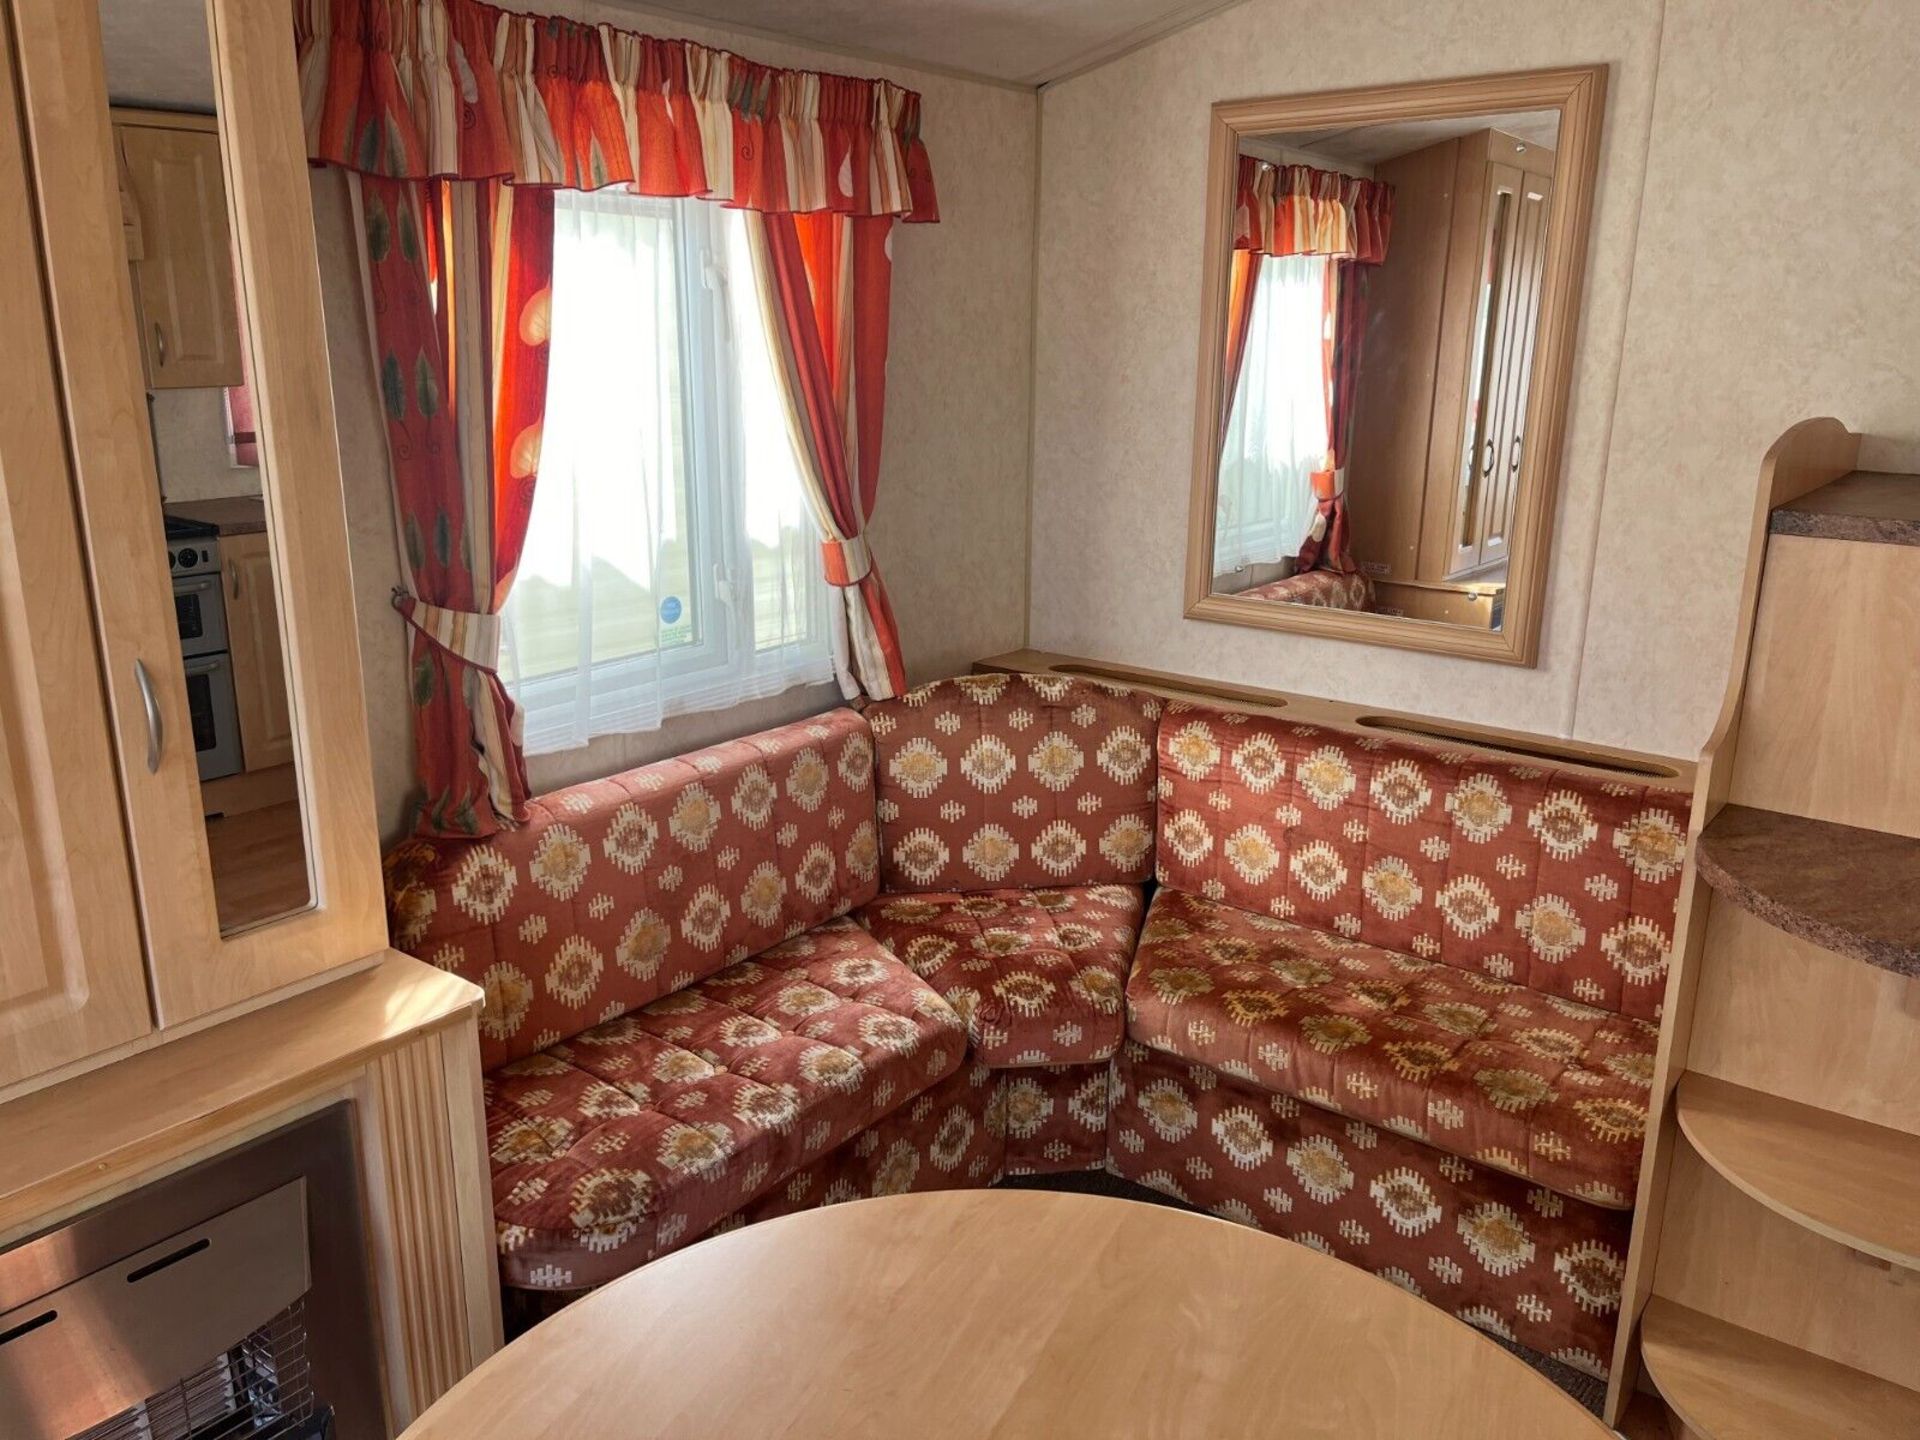 UPGRADE POTENTIAL: WILLERBY WESTMOORLAND OFF-SITE SALE - Image 5 of 17